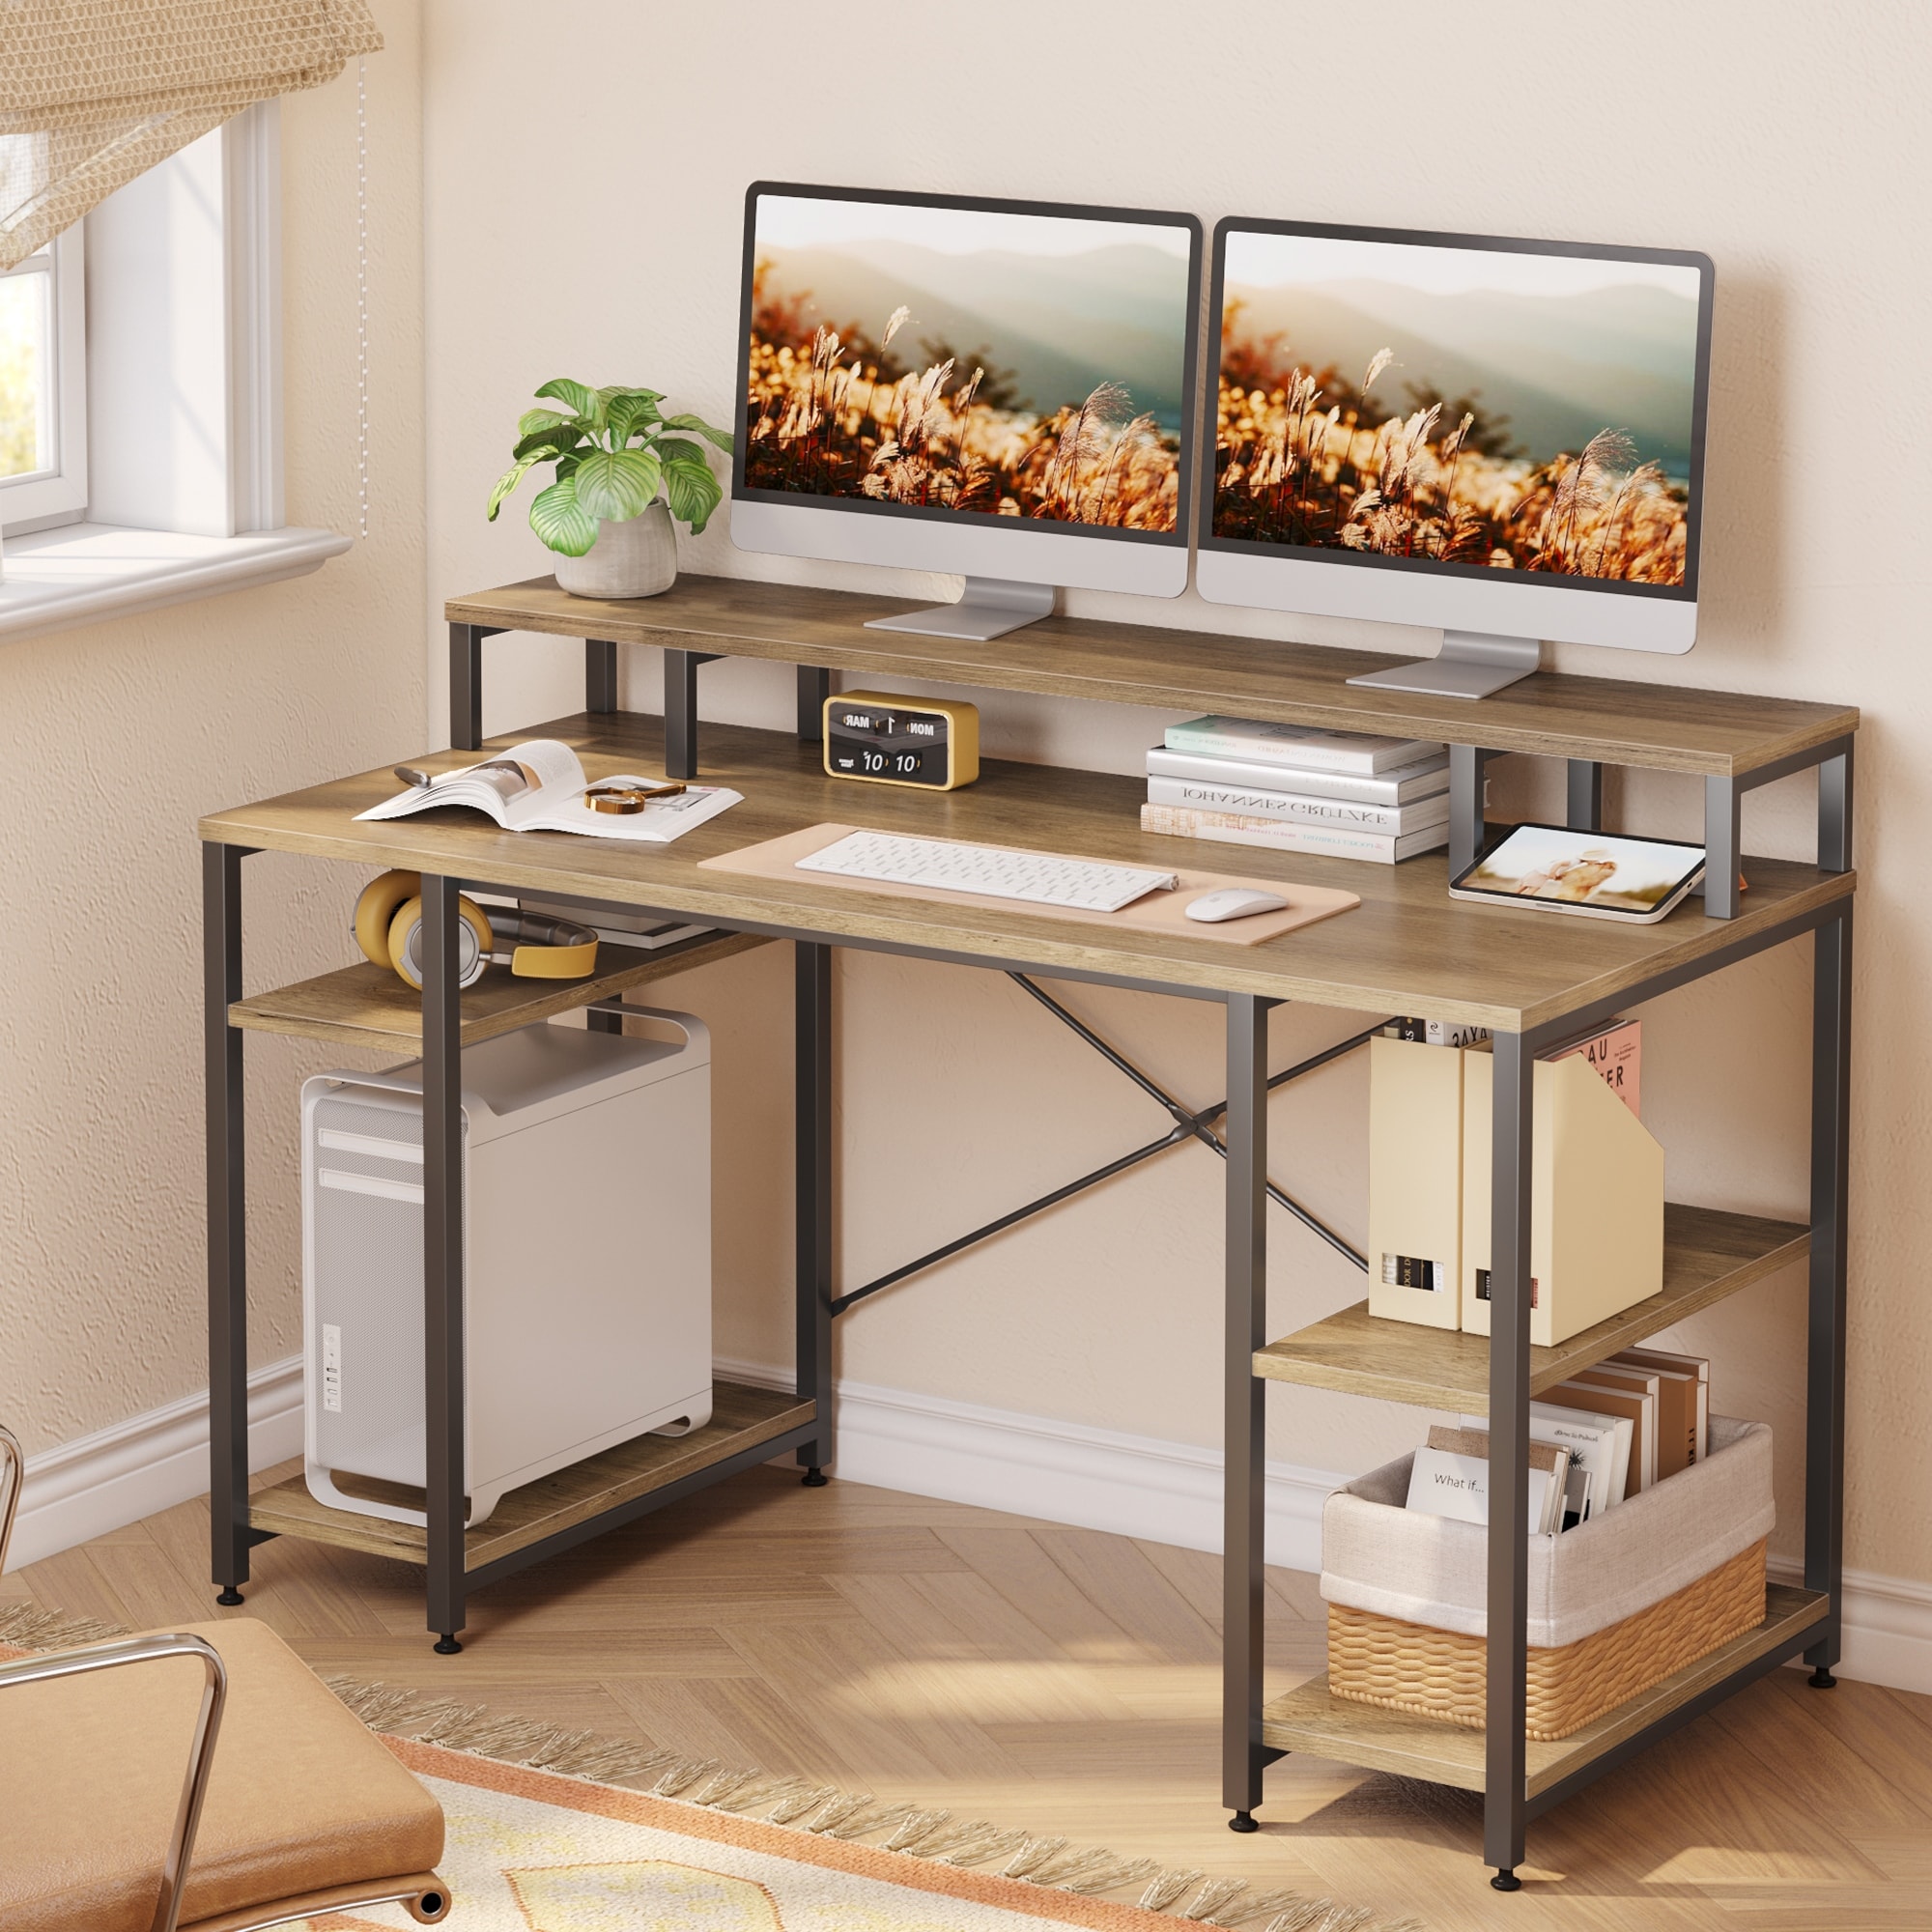 https://ak1.ostkcdn.com/images/products/is/images/direct/e2d4d50de9d278dee34ad2e153b21aaabf9028c6/55-Inch-Dual-Monitor-Computer-Desk-with-Adjustable-Shelves.jpg